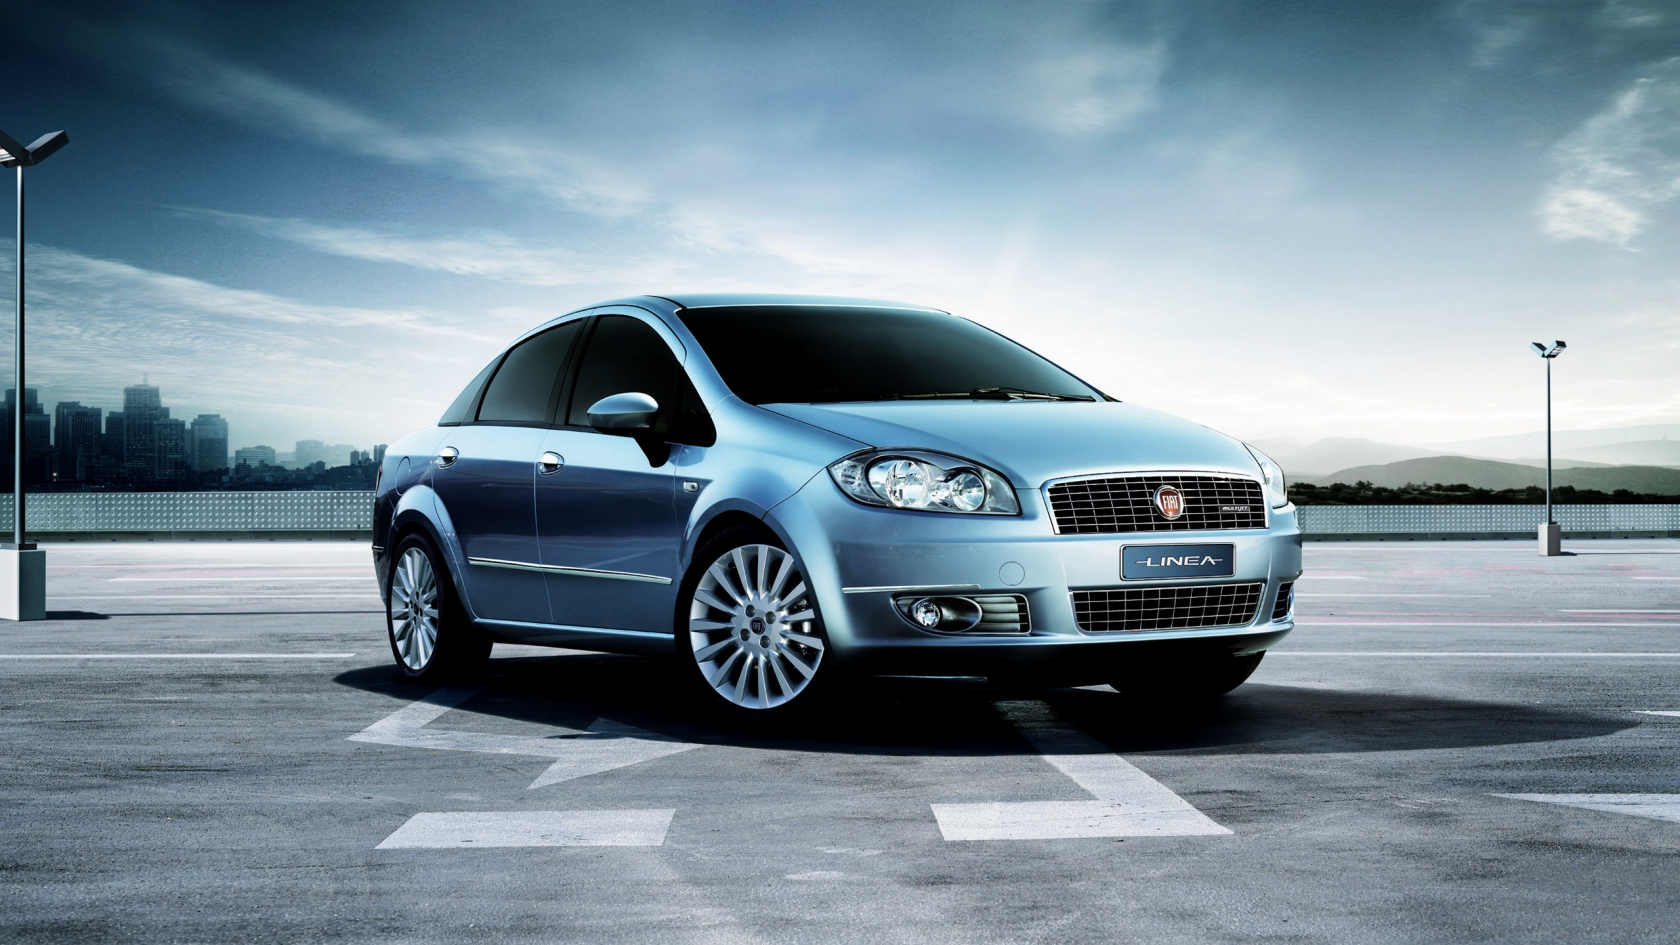 Fiat Linea 2009 for 1680 x 945 HDTV resolution